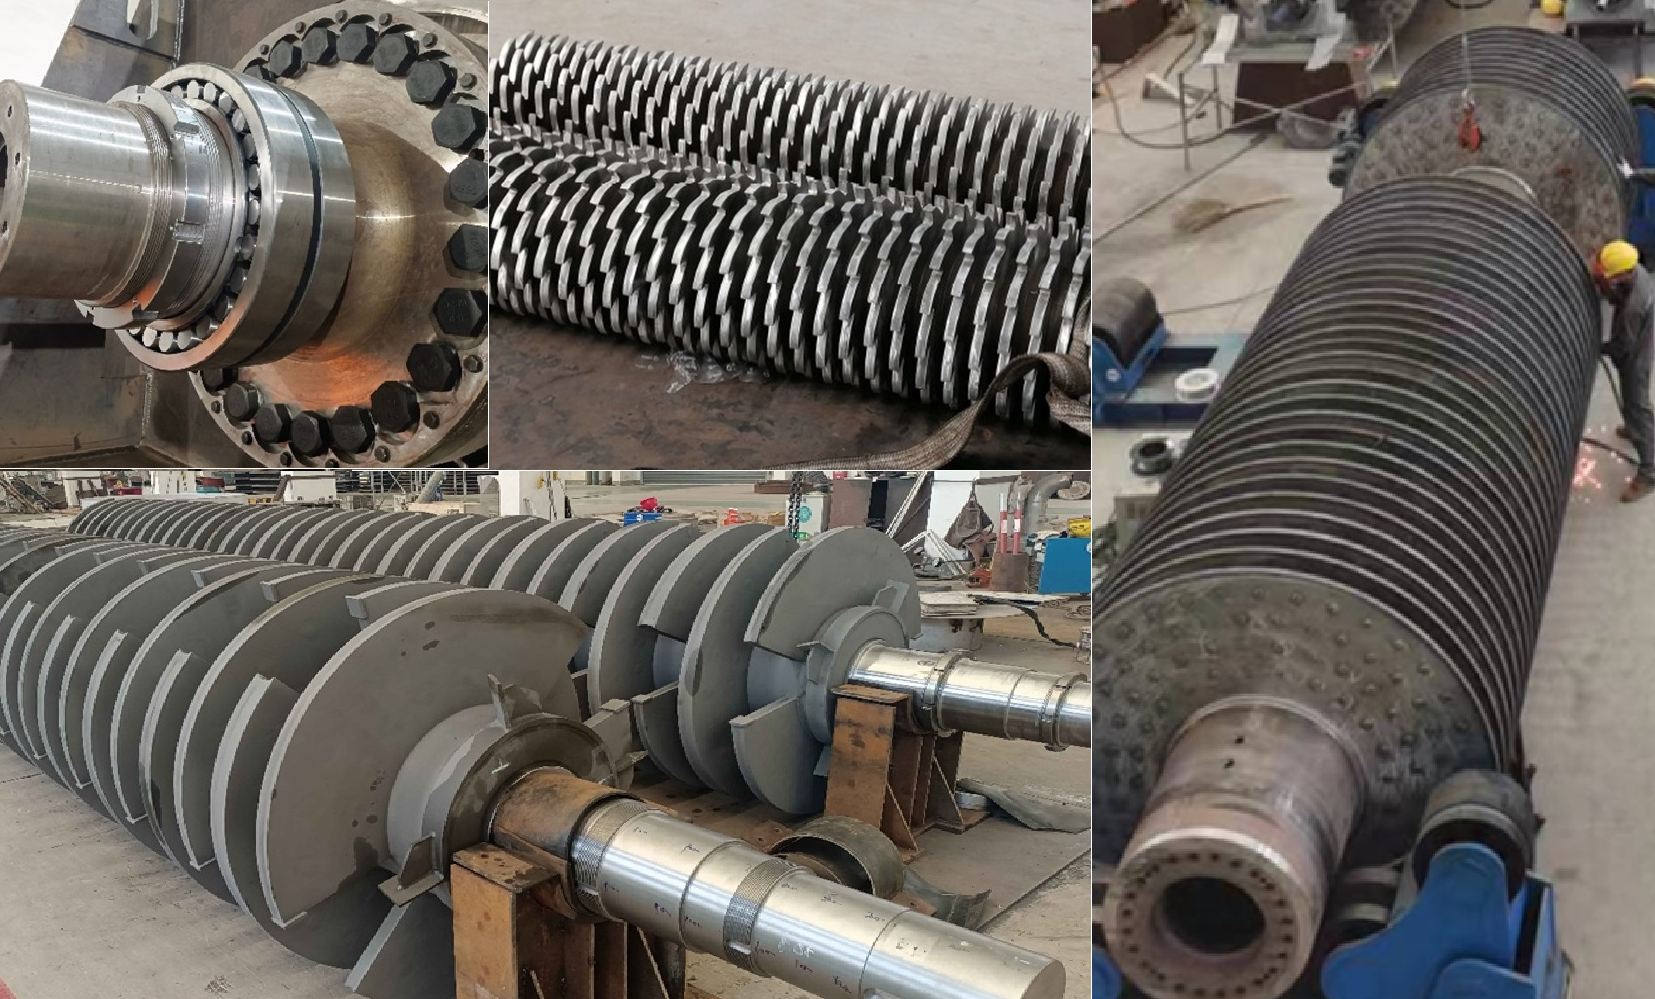 Rotor replacement for disc dryer and lamella pump spare parts, hardox knives for crusher